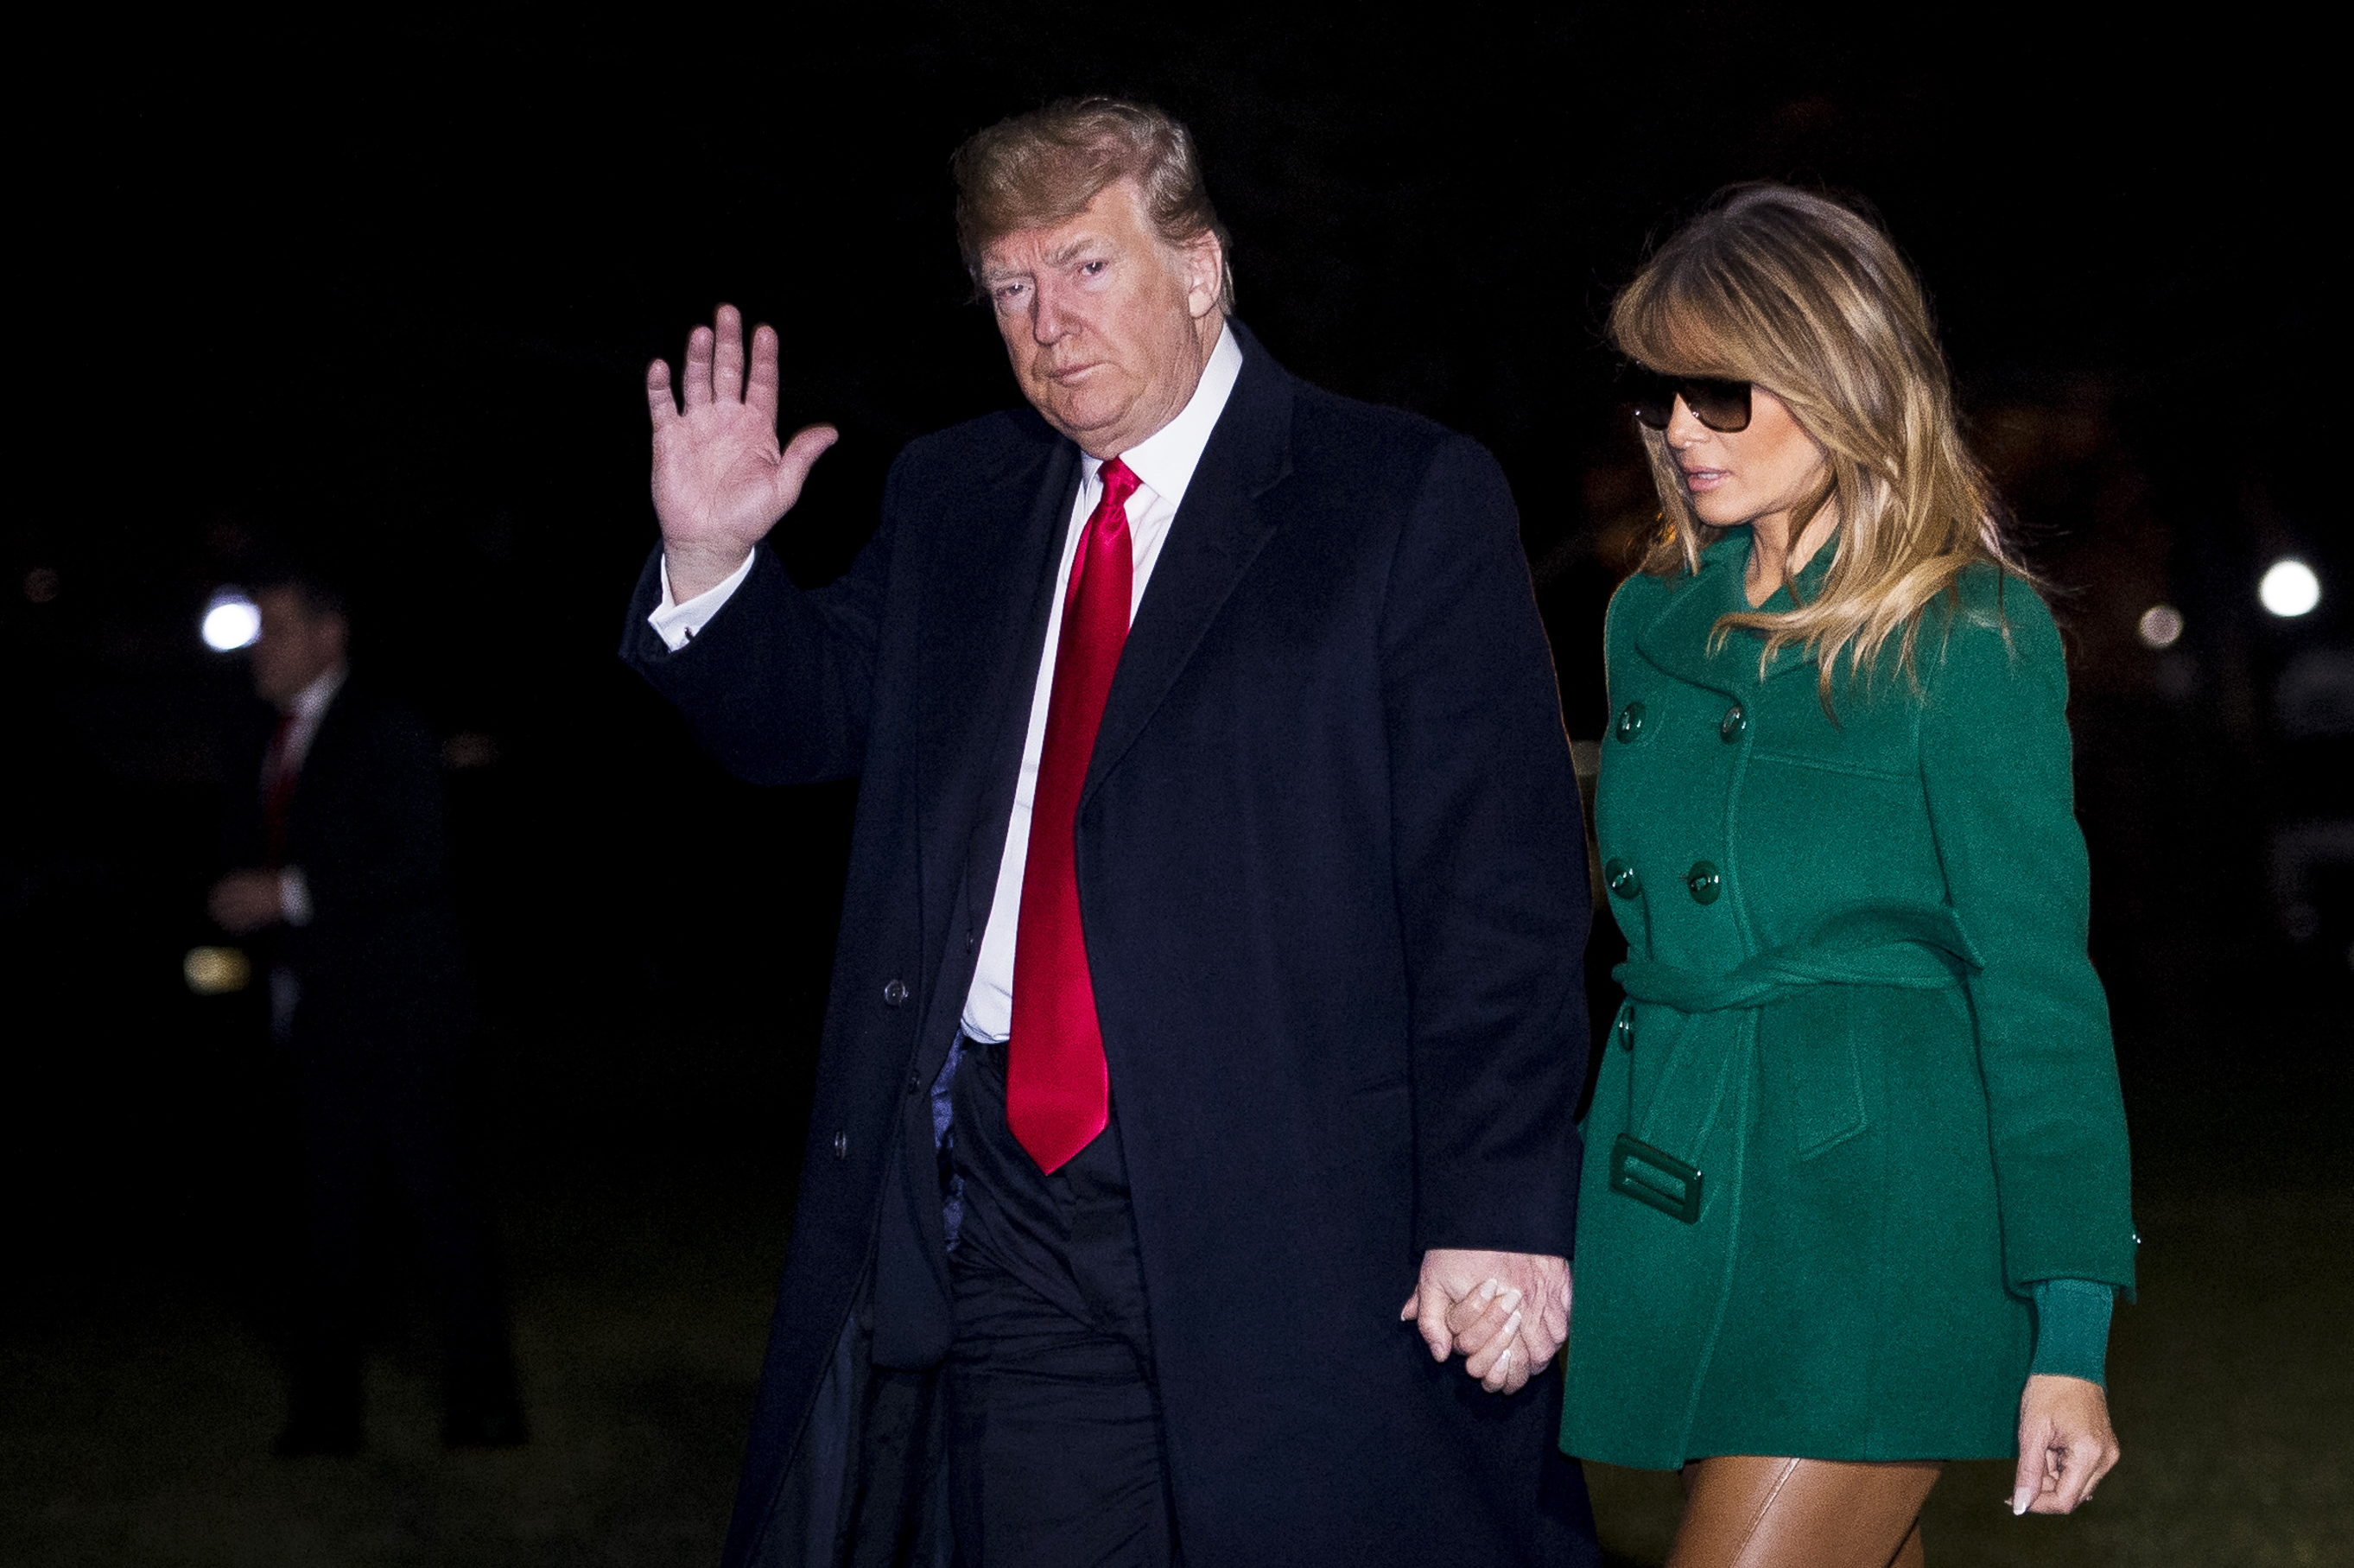 U.S. President Donald Trump and First Lady Melania Trump make their way across the South Lawn of the White House after returning on Marine One from their surprise trip to Al Asad Air Base in Iraq to visit troops, on December 27, 2018 in Washington, DC. (Photo by Pete Marovich - Pool/Getty Images)